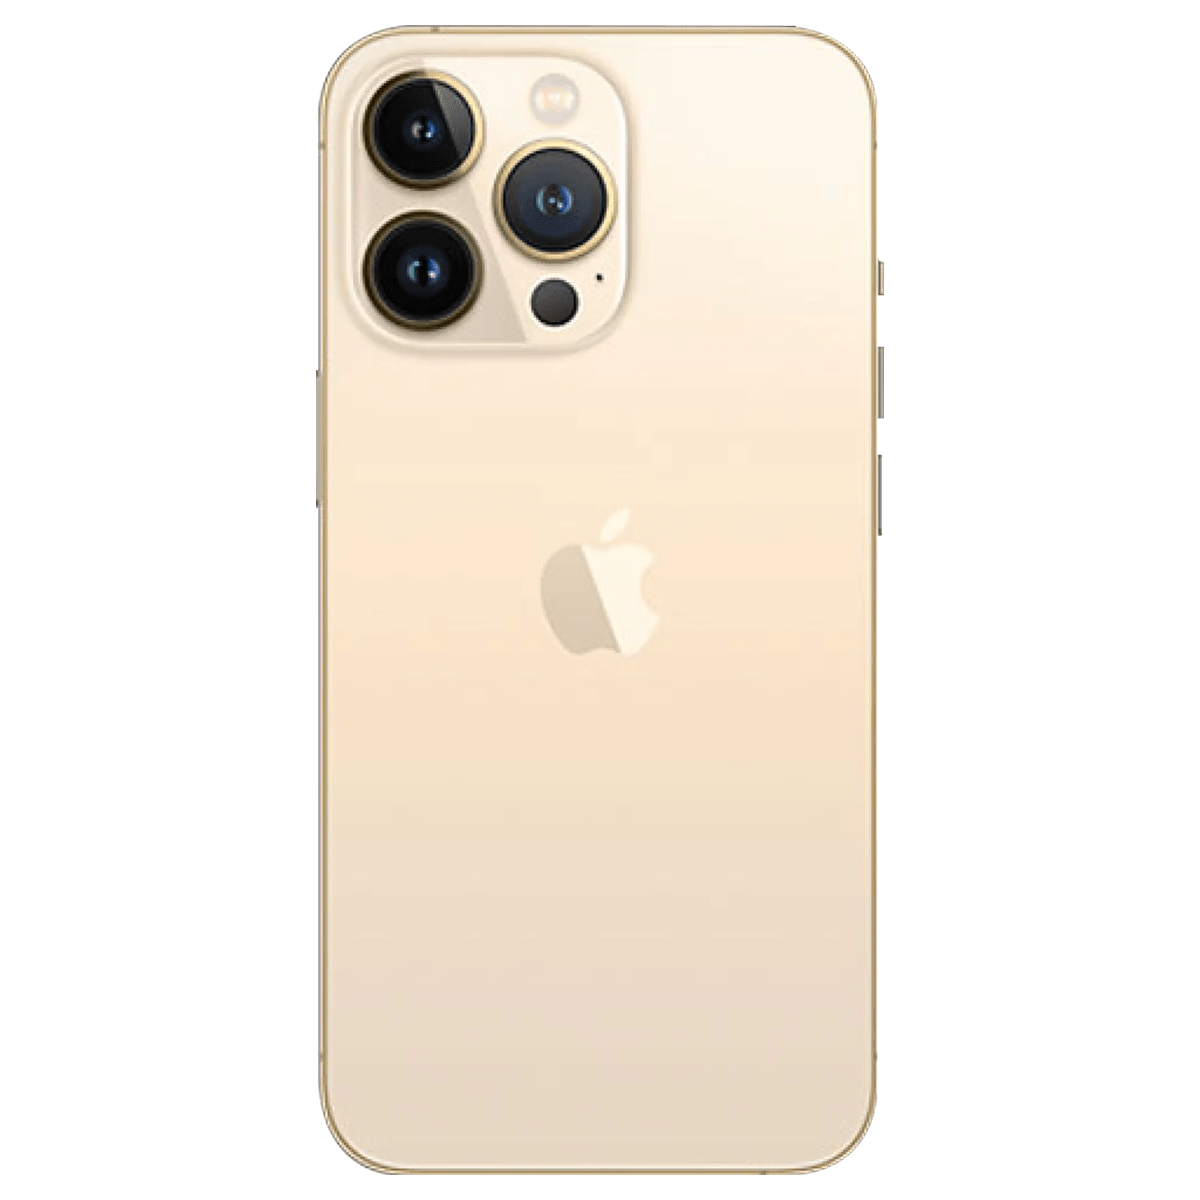 iphone 13 png iphone 13 png transparent iphone 13 png mockup iphone 13 png black iphone 13 pro max png download apple iphone 13